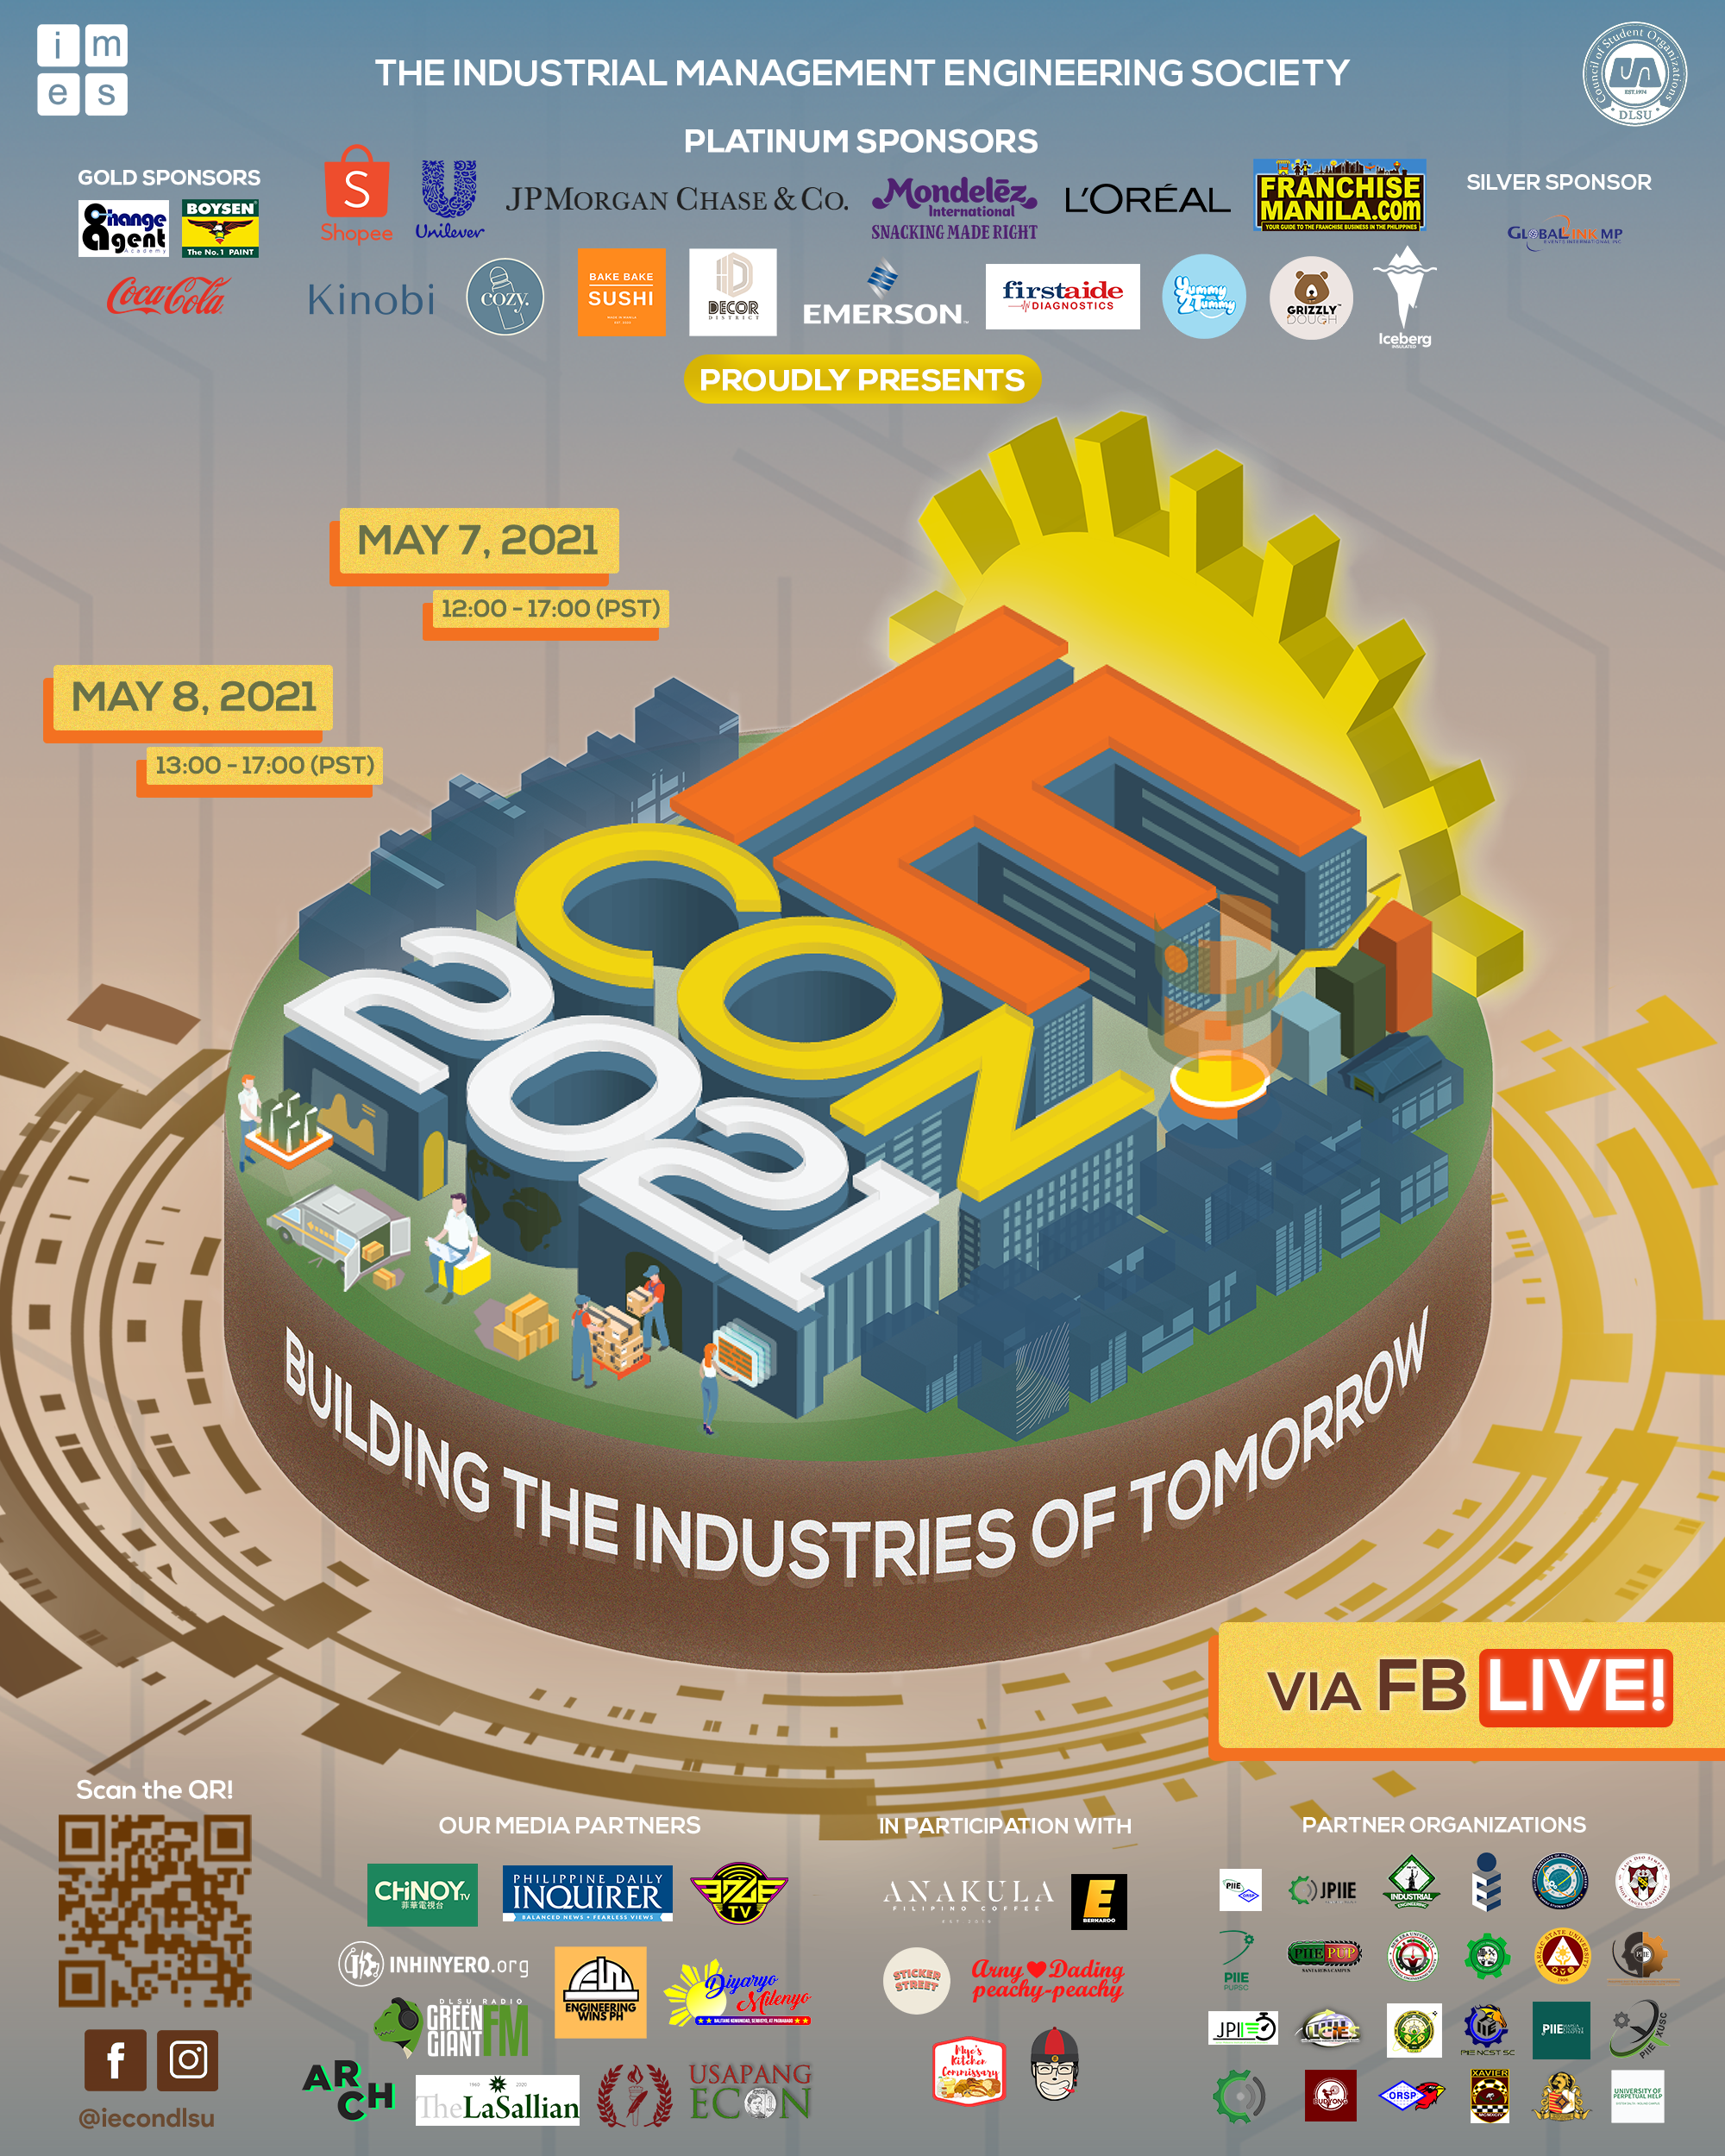 IECON 2021: Building the Industries of Tomorrow